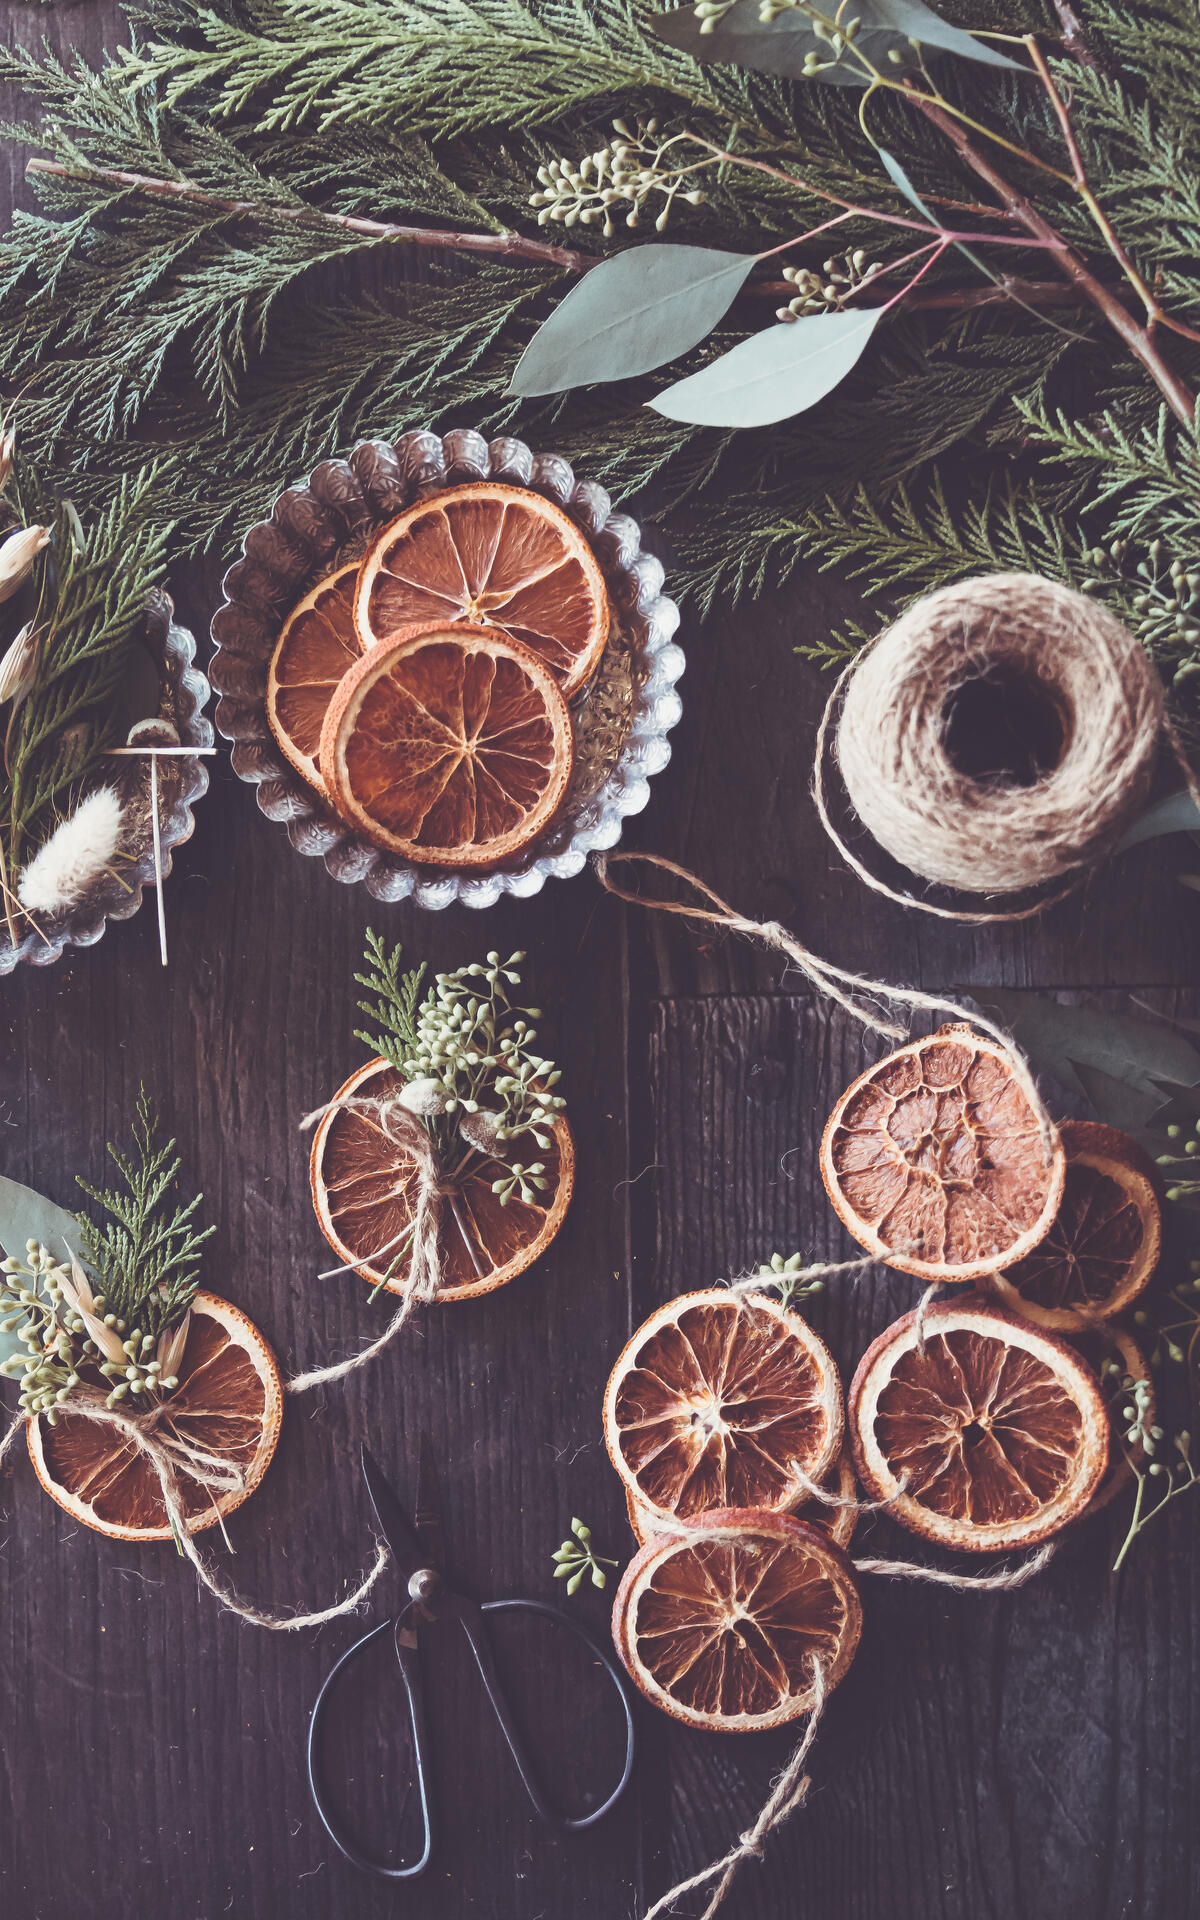 Decorating with old dried oranges